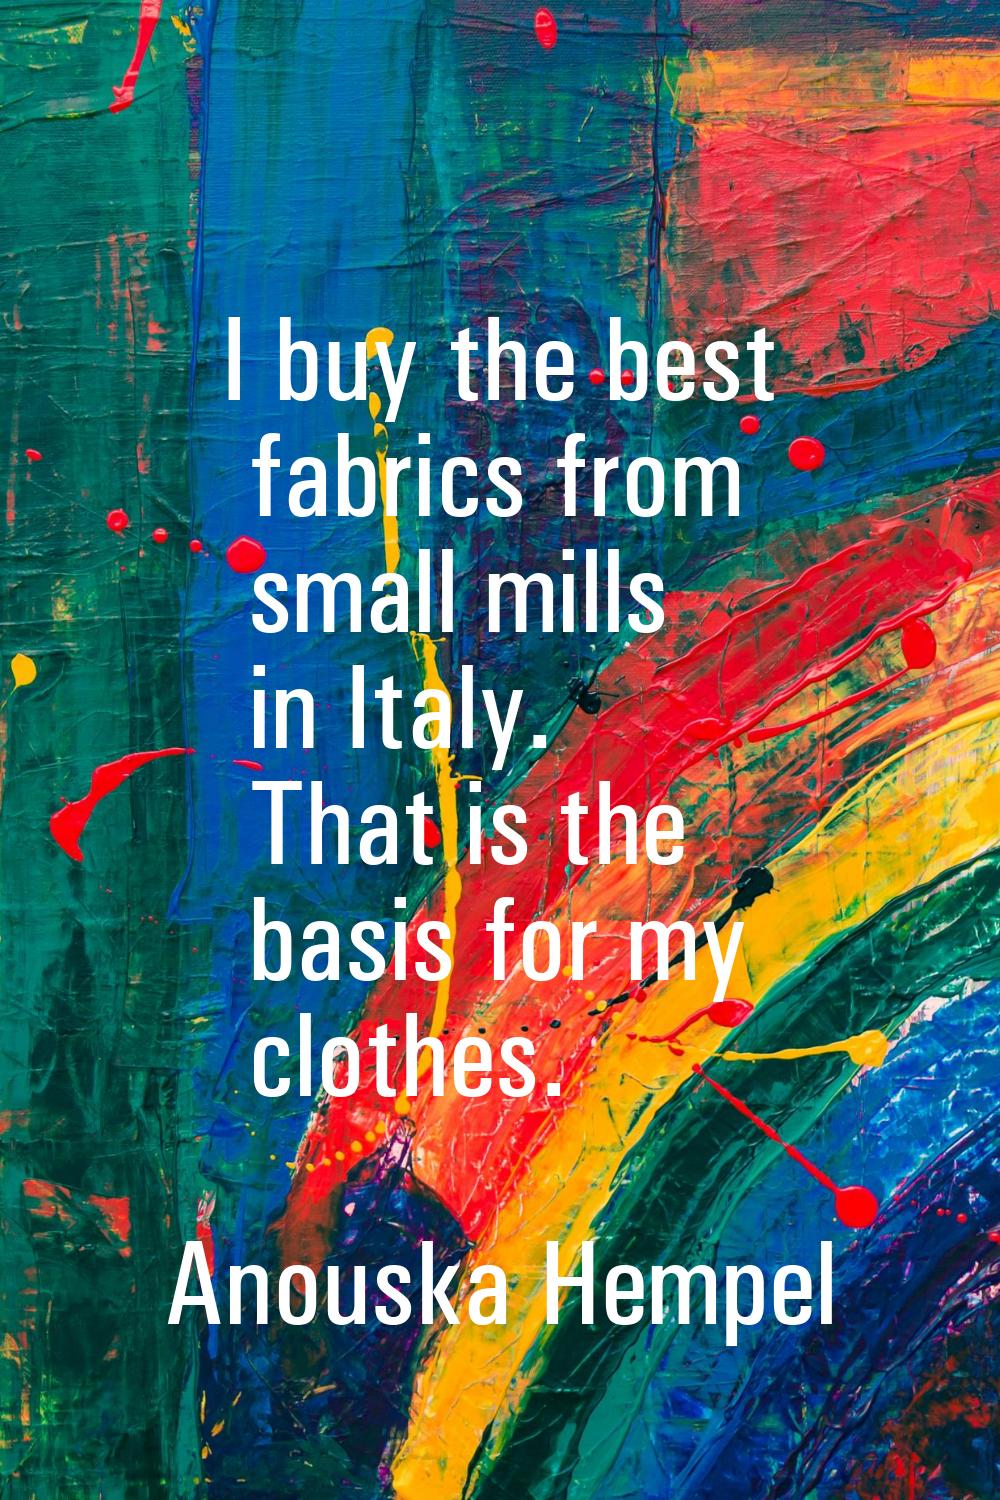 I buy the best fabrics from small mills in Italy. That is the basis for my clothes.